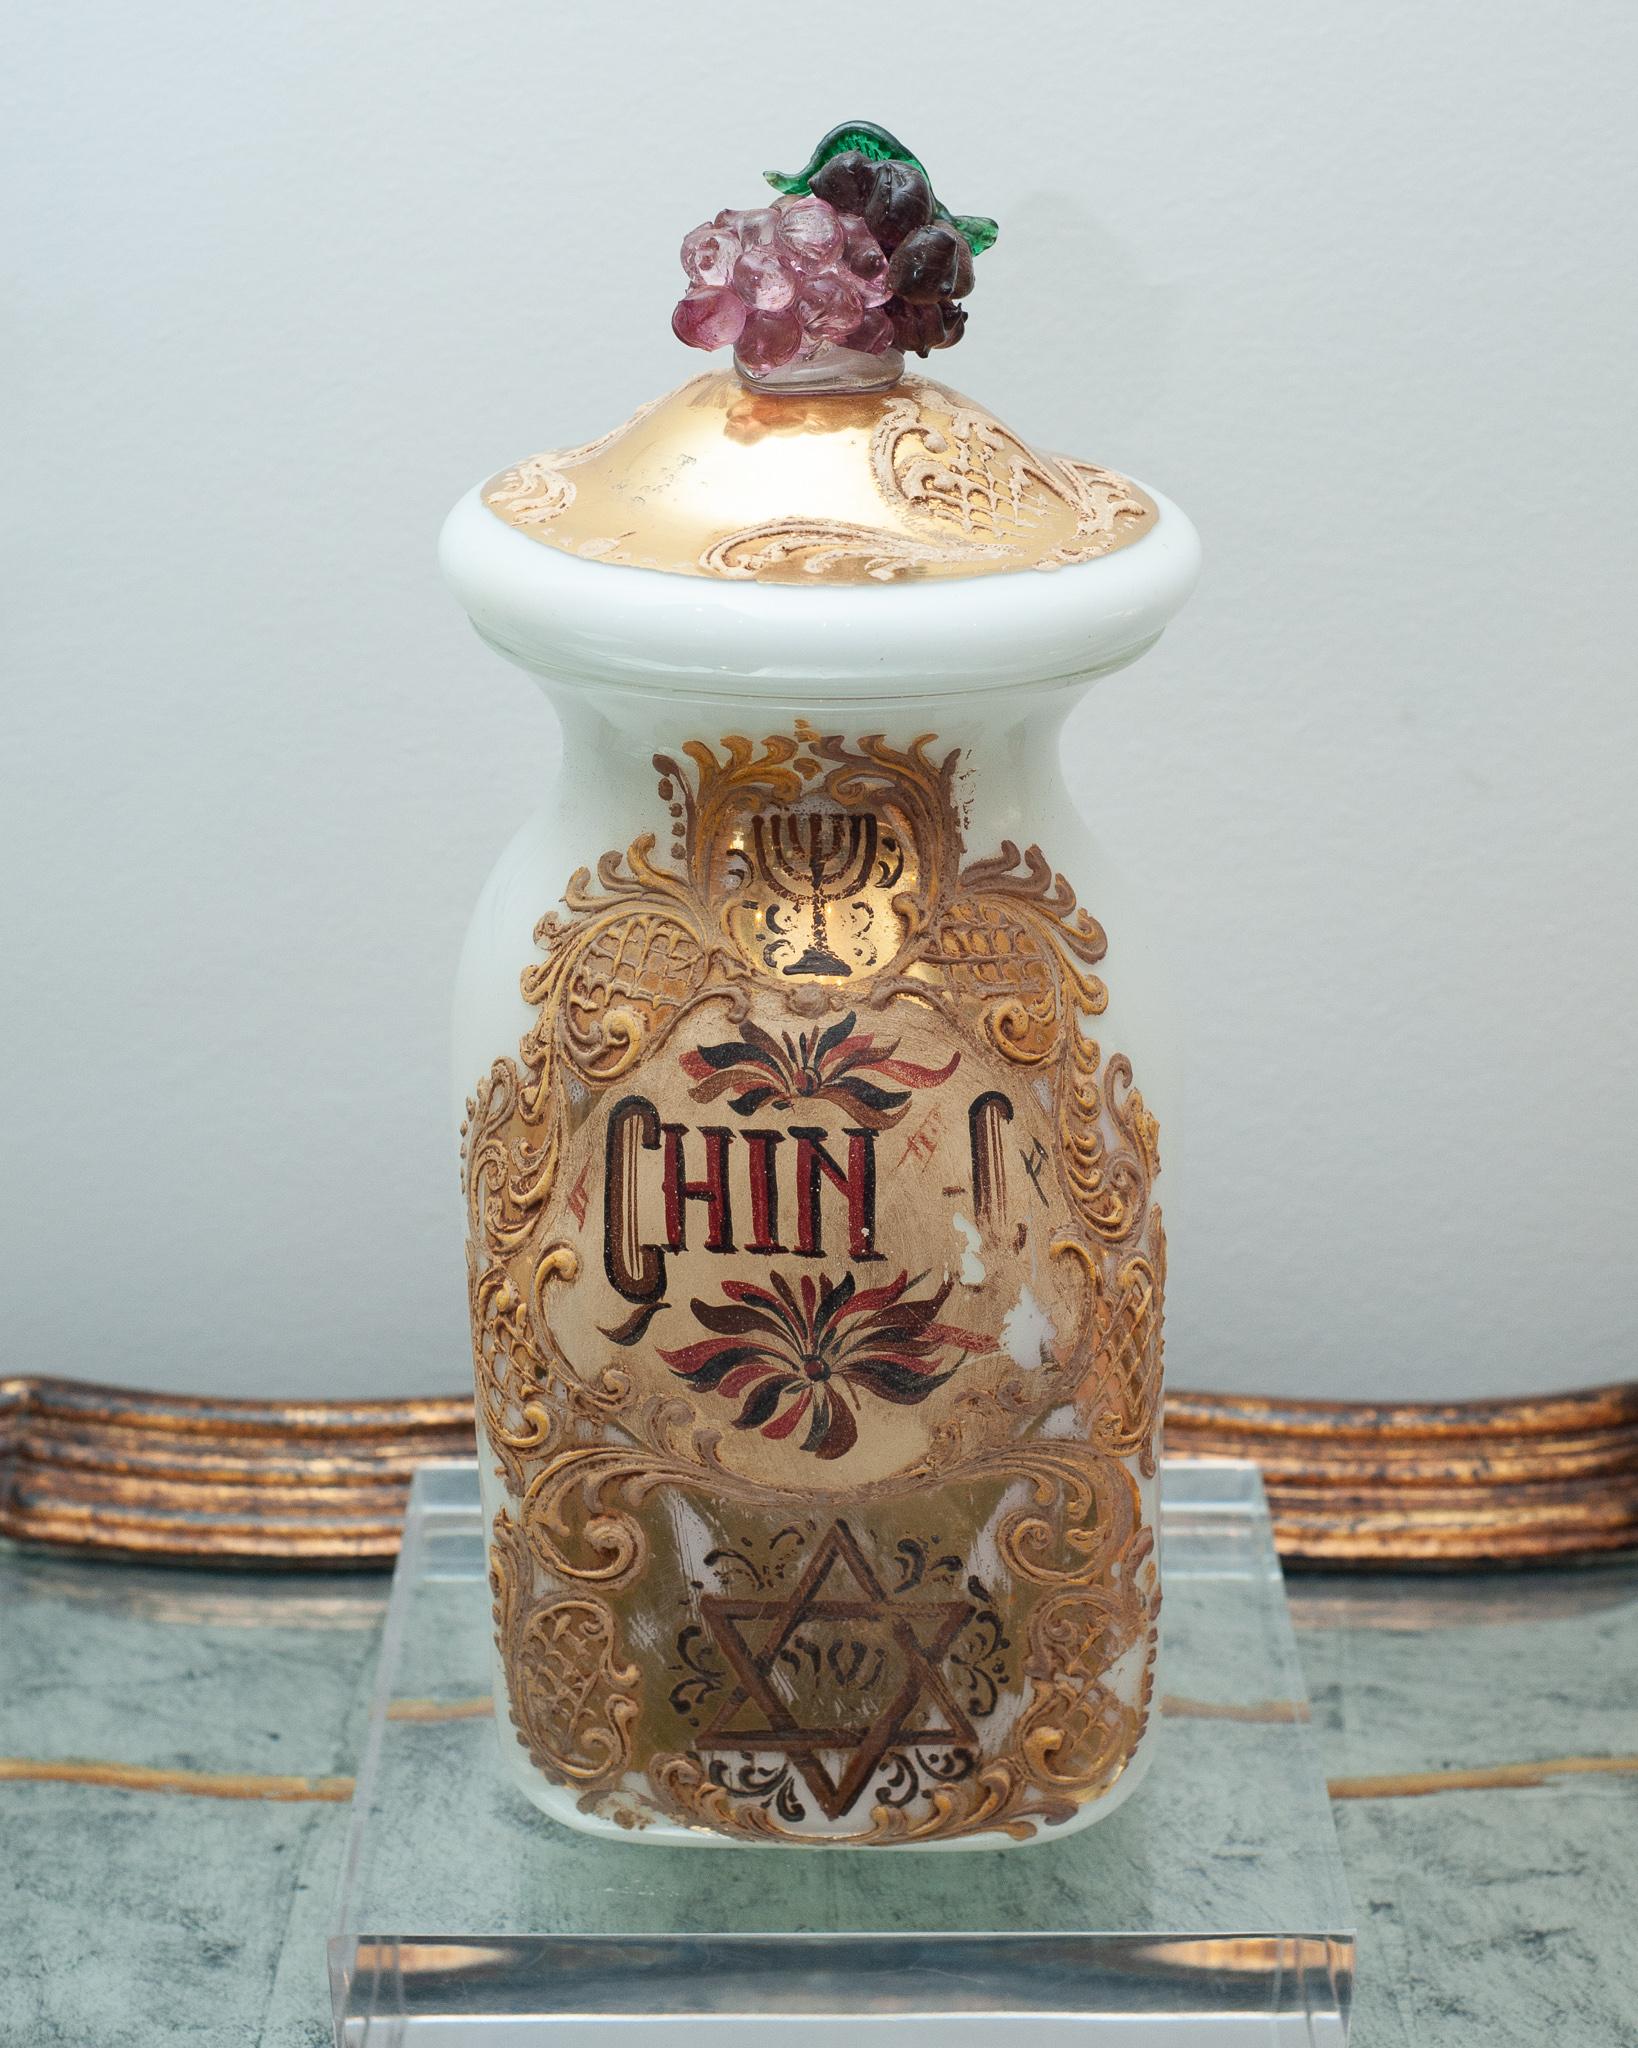 A beautiful large antique Italian Murano glass pharmacy / apothecary canister with lid. Elaborately hand-painted and gilt on white Murano glass, featuring Star of David motif and glass cluster of grapes on lid.